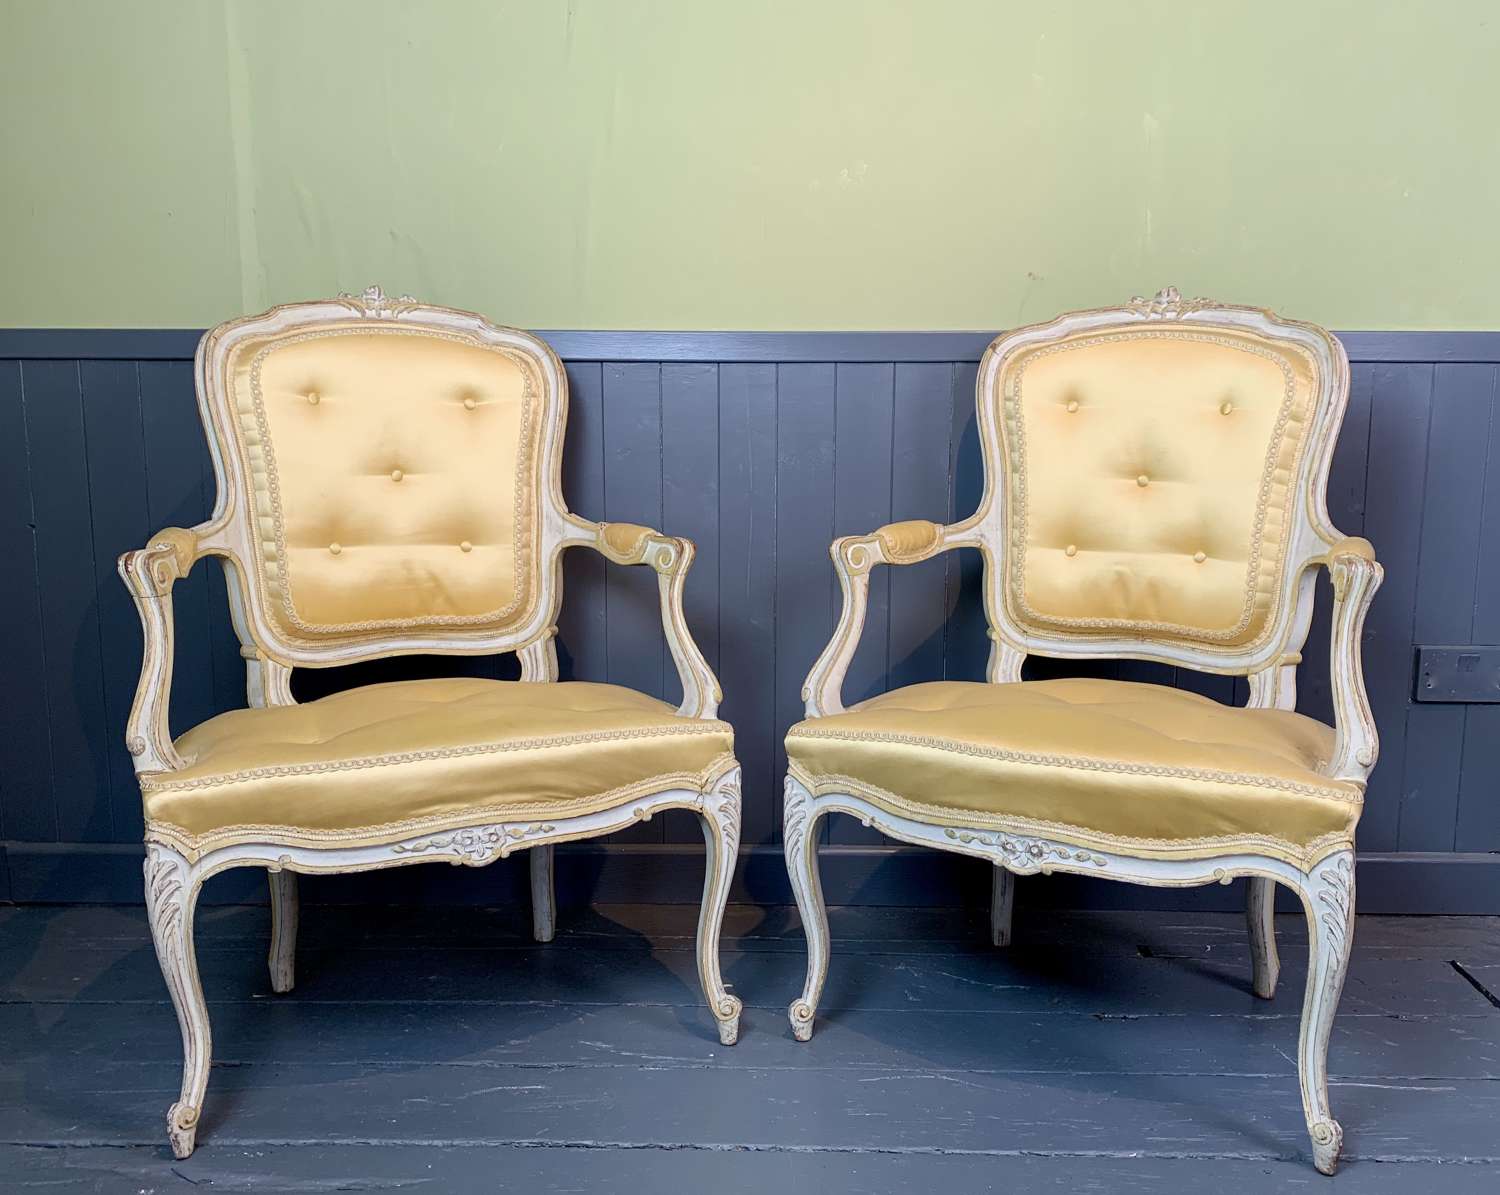 Pair of French Louis XV Revival Painted Fauteuils